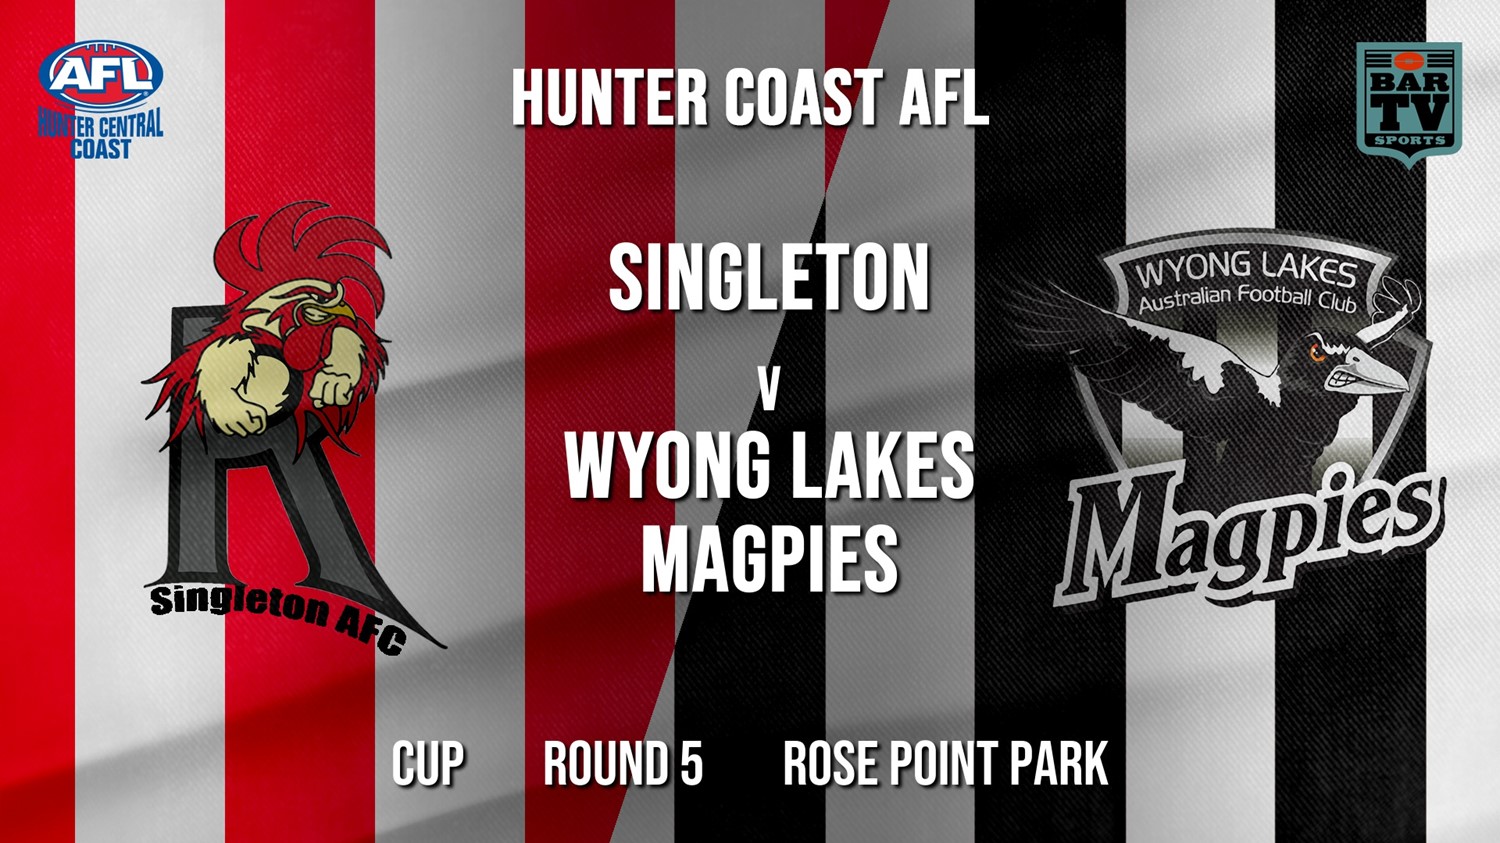 AFL HCC Round 5 - Cup - Singleton Roosters v Wyong Lakes Magpies Minigame Slate Image